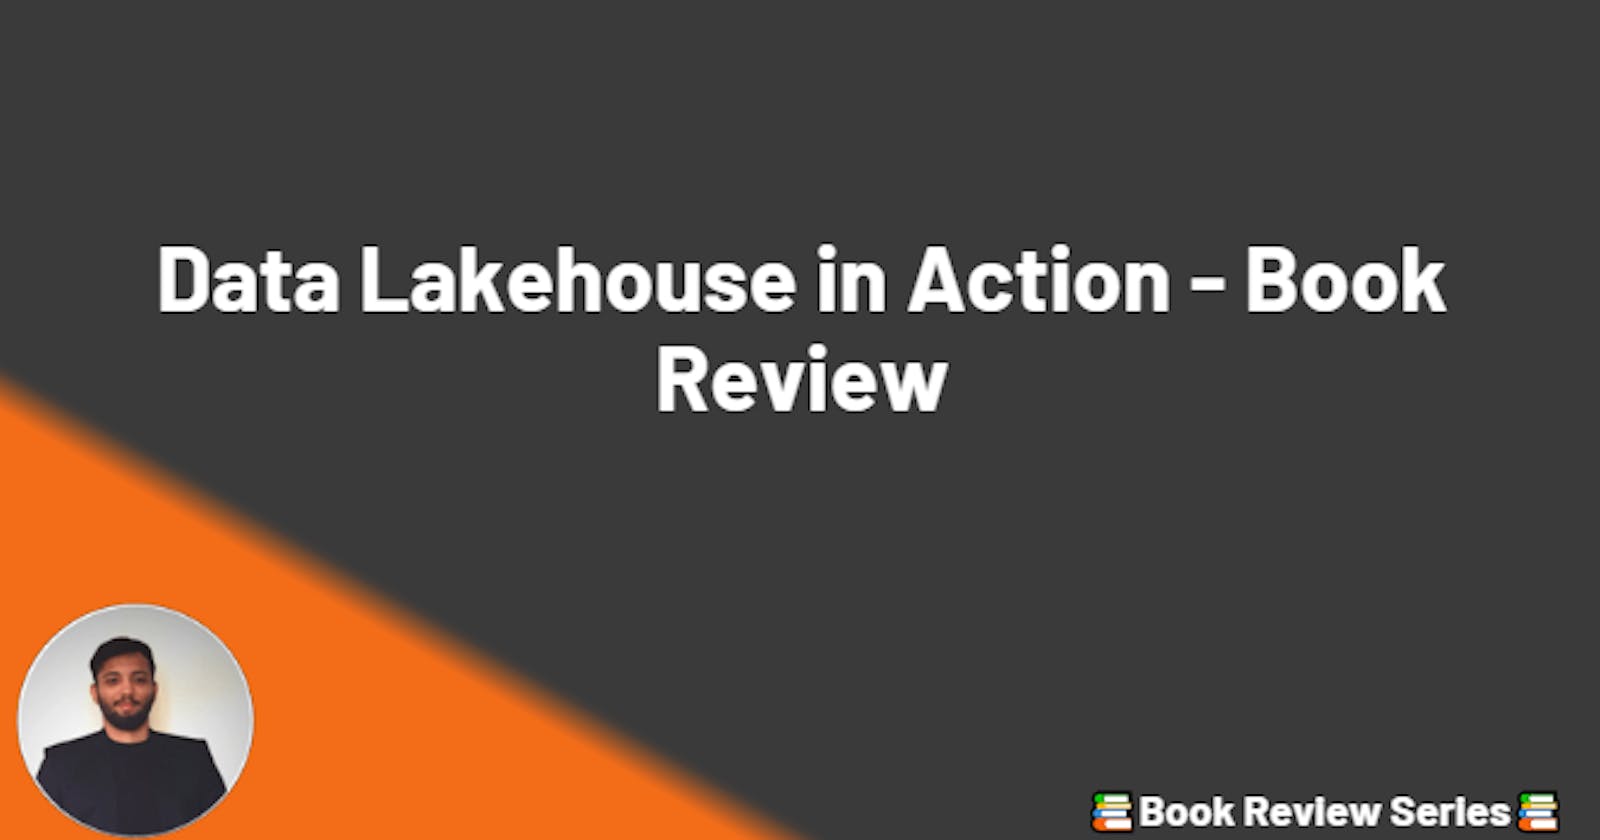 Data Lakehouse in Action - Book Review